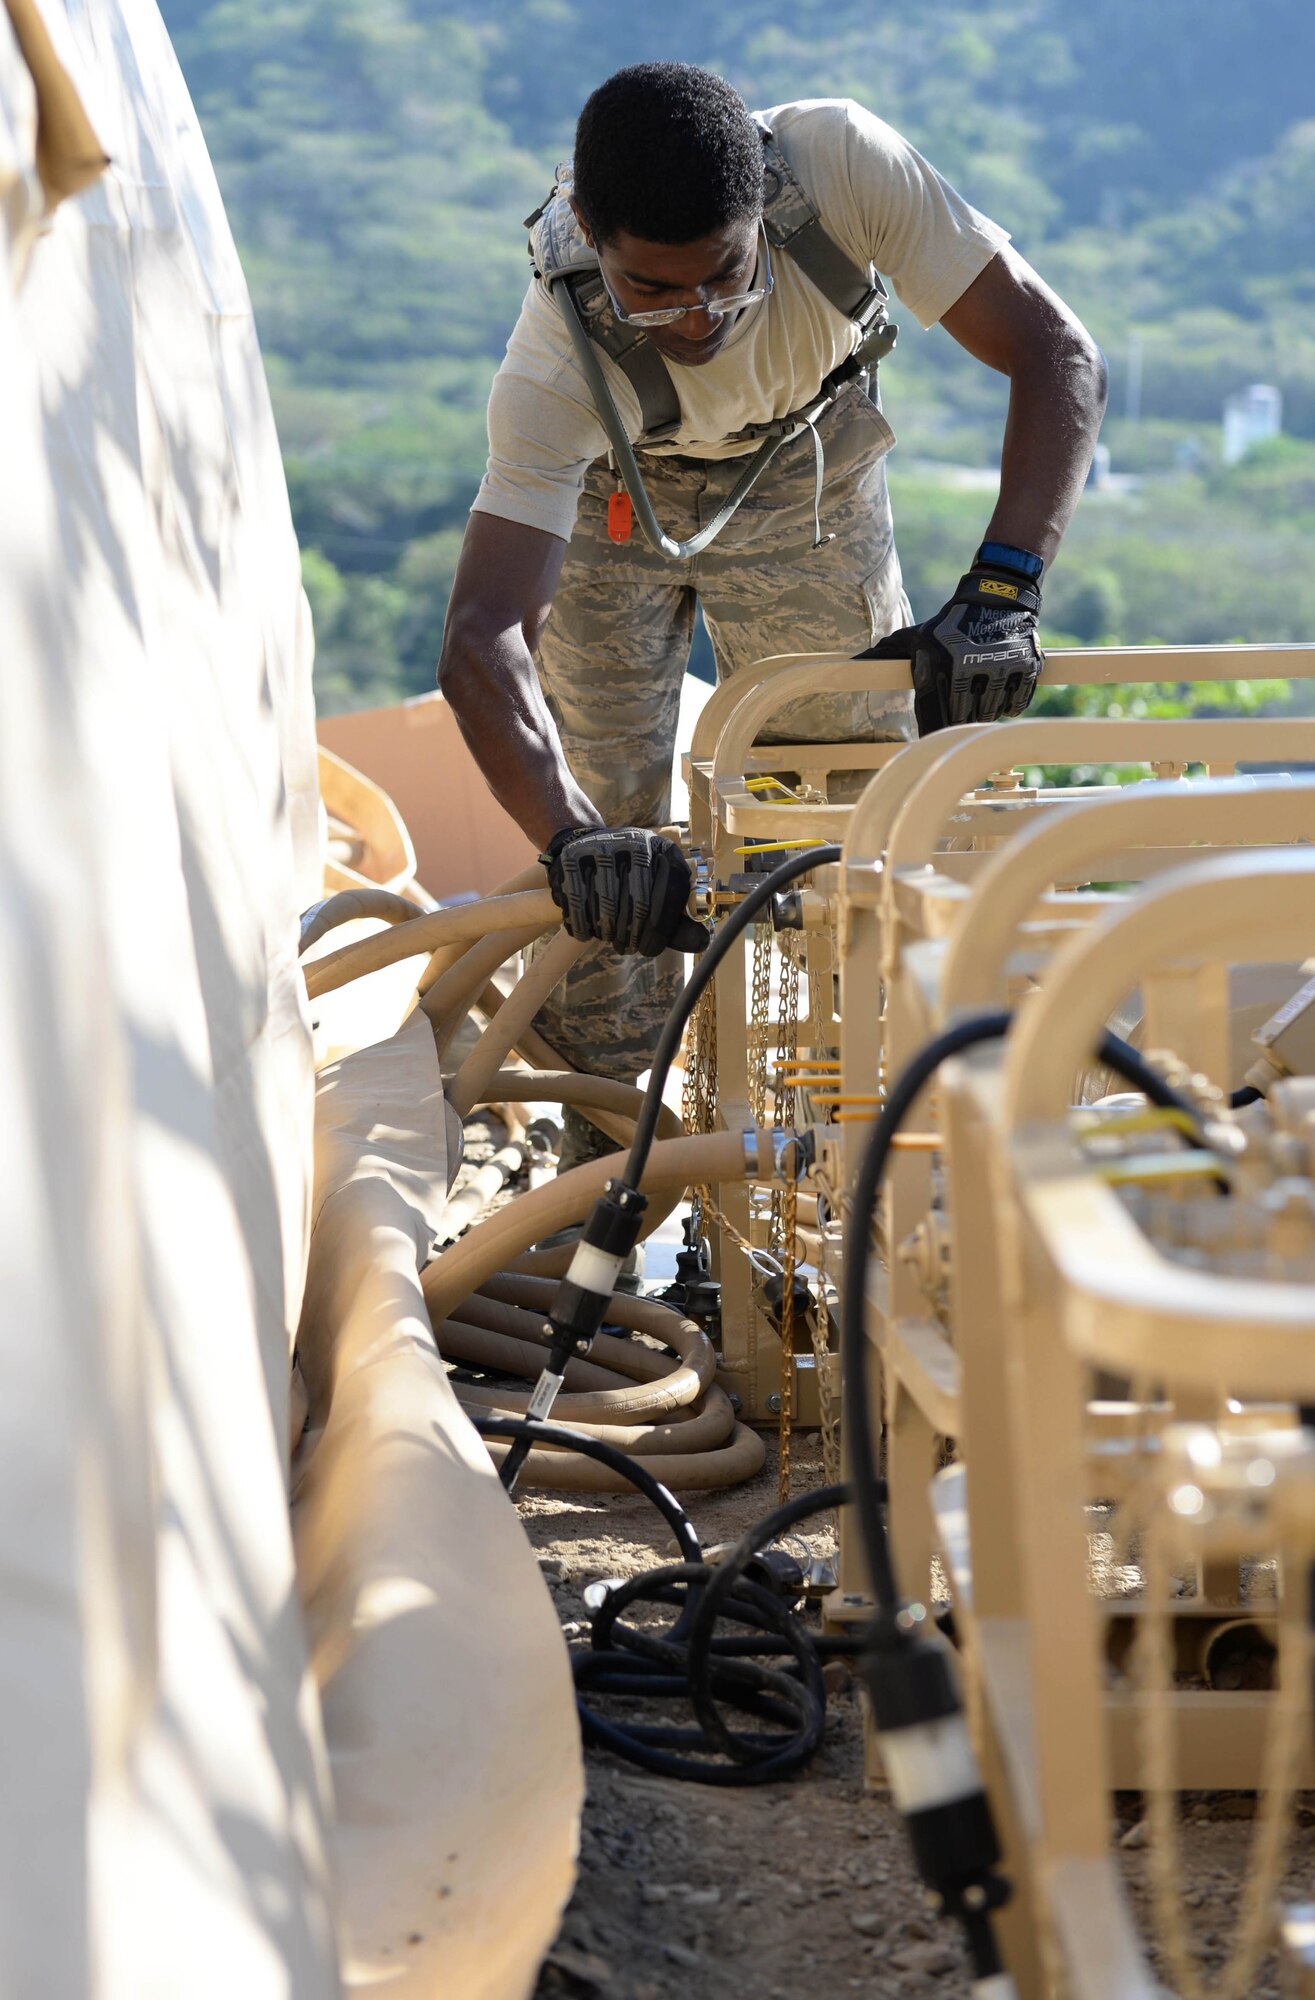 U.S. Air Force Staff Sgt. Stark Sarrazin, a water and fuel systems maintenance craftsman with the 635th Materiel Maintenance Squadron out of Holloman Air Force Base, N.M., attaches hoses to pumps that will supply water to a newly-constructed laundry facility in the Dominican Republic, March 29, 2017, as part of NEW HORIZONS 2017. The pumps will supply clean water as well as pull dirty water from 10 washers that will support approximately 450 Airmen, Soldiers, Marines and Sailors participating in the annual exercise on a rotational basis. (U.S. Air Force photo by Staff Sgt. Timothy M. Young)